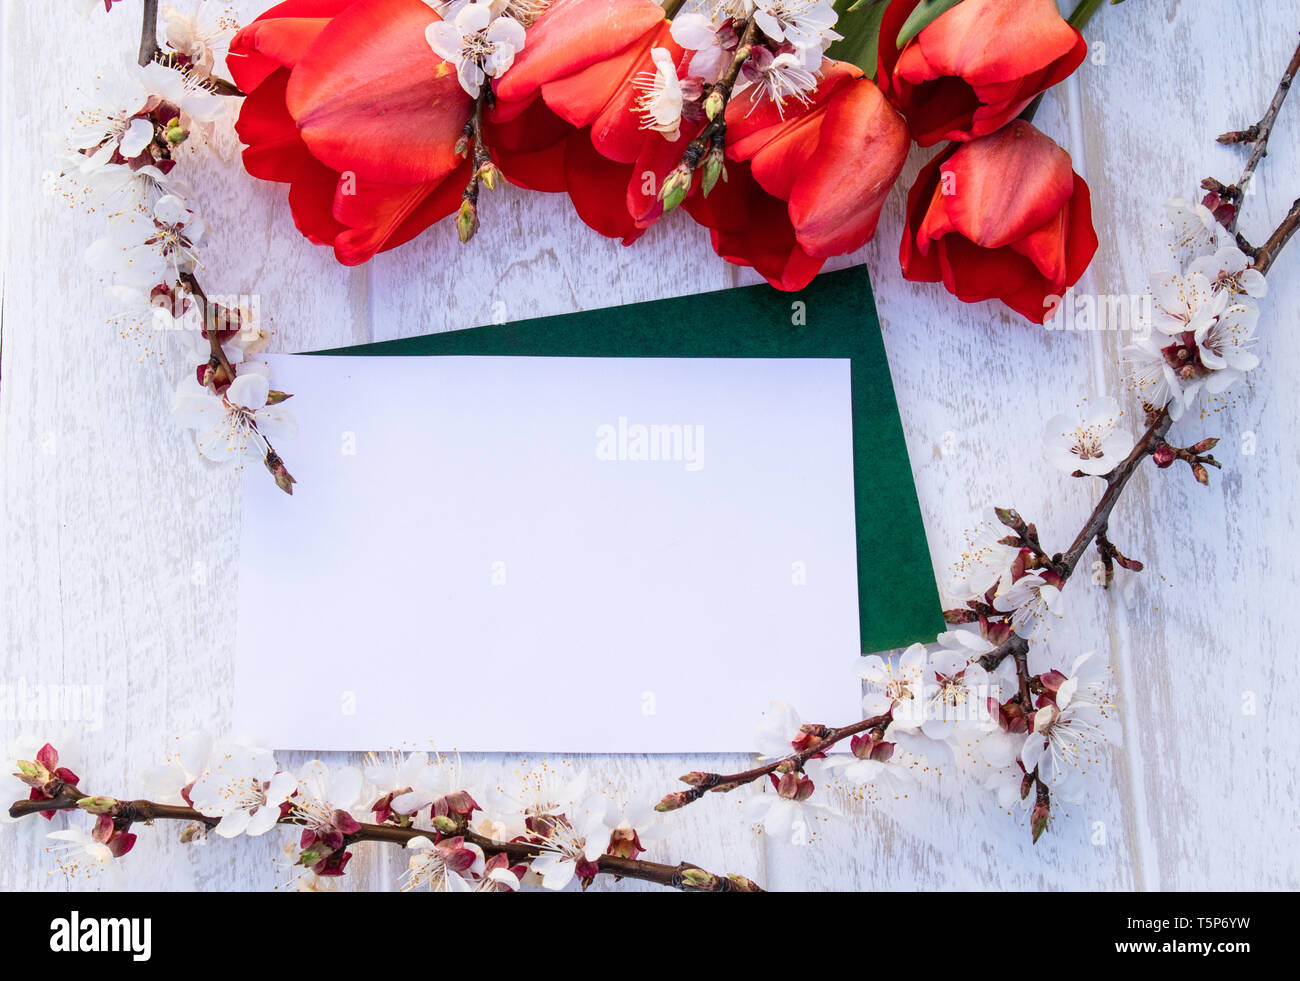 A bouquet of red tulips and branches of white flowers against white boards. Place for text. The concept of spring has come. View from above. Banner Ma Stock Photo